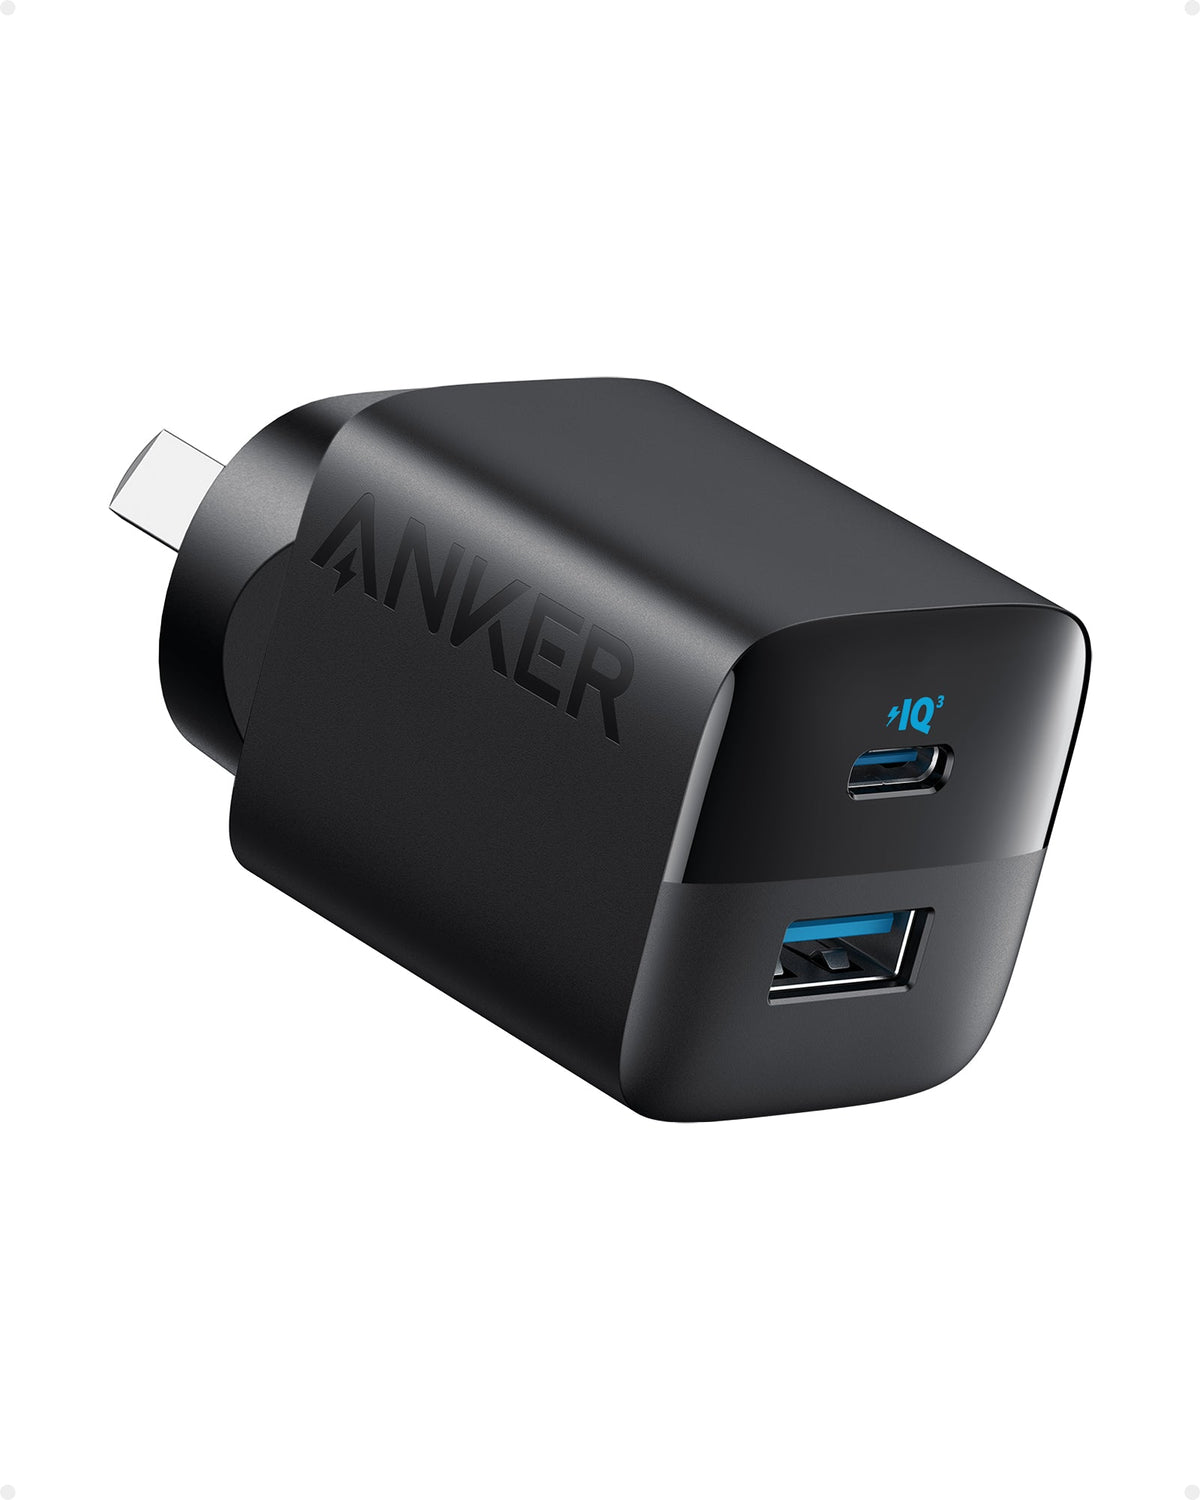 Anker 335 Power Bank (PowerCore 20K) and Anker &lt;b&gt;323&lt;/b&gt; Charger (33W)